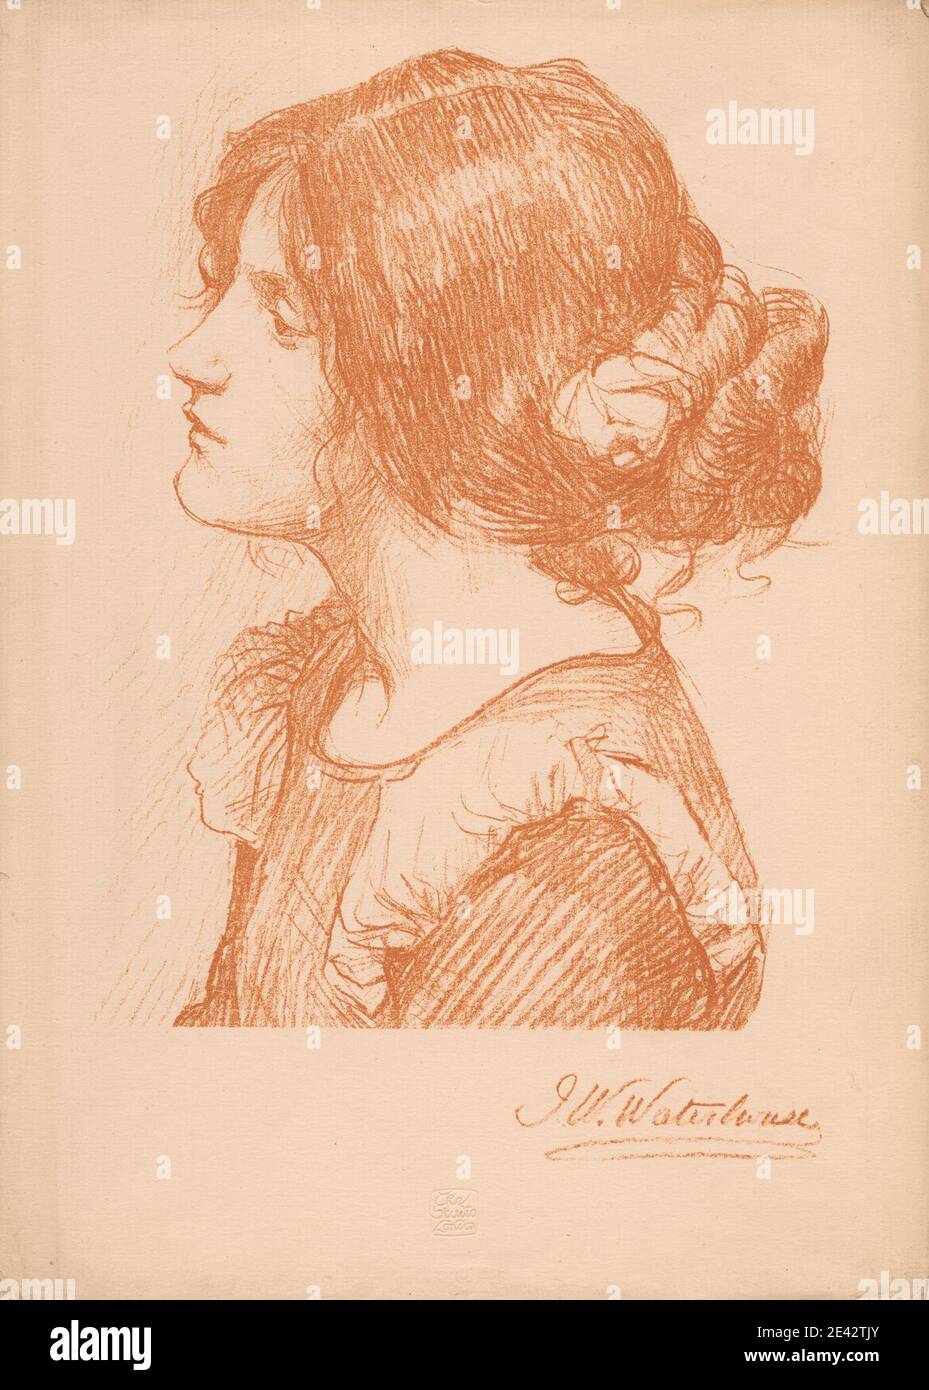 John William Waterhouse, 1849â€“1917, British, Head of a Woman (Various lithographs from 'The Studio' journal), 1896. Lithograph. Stock Photo